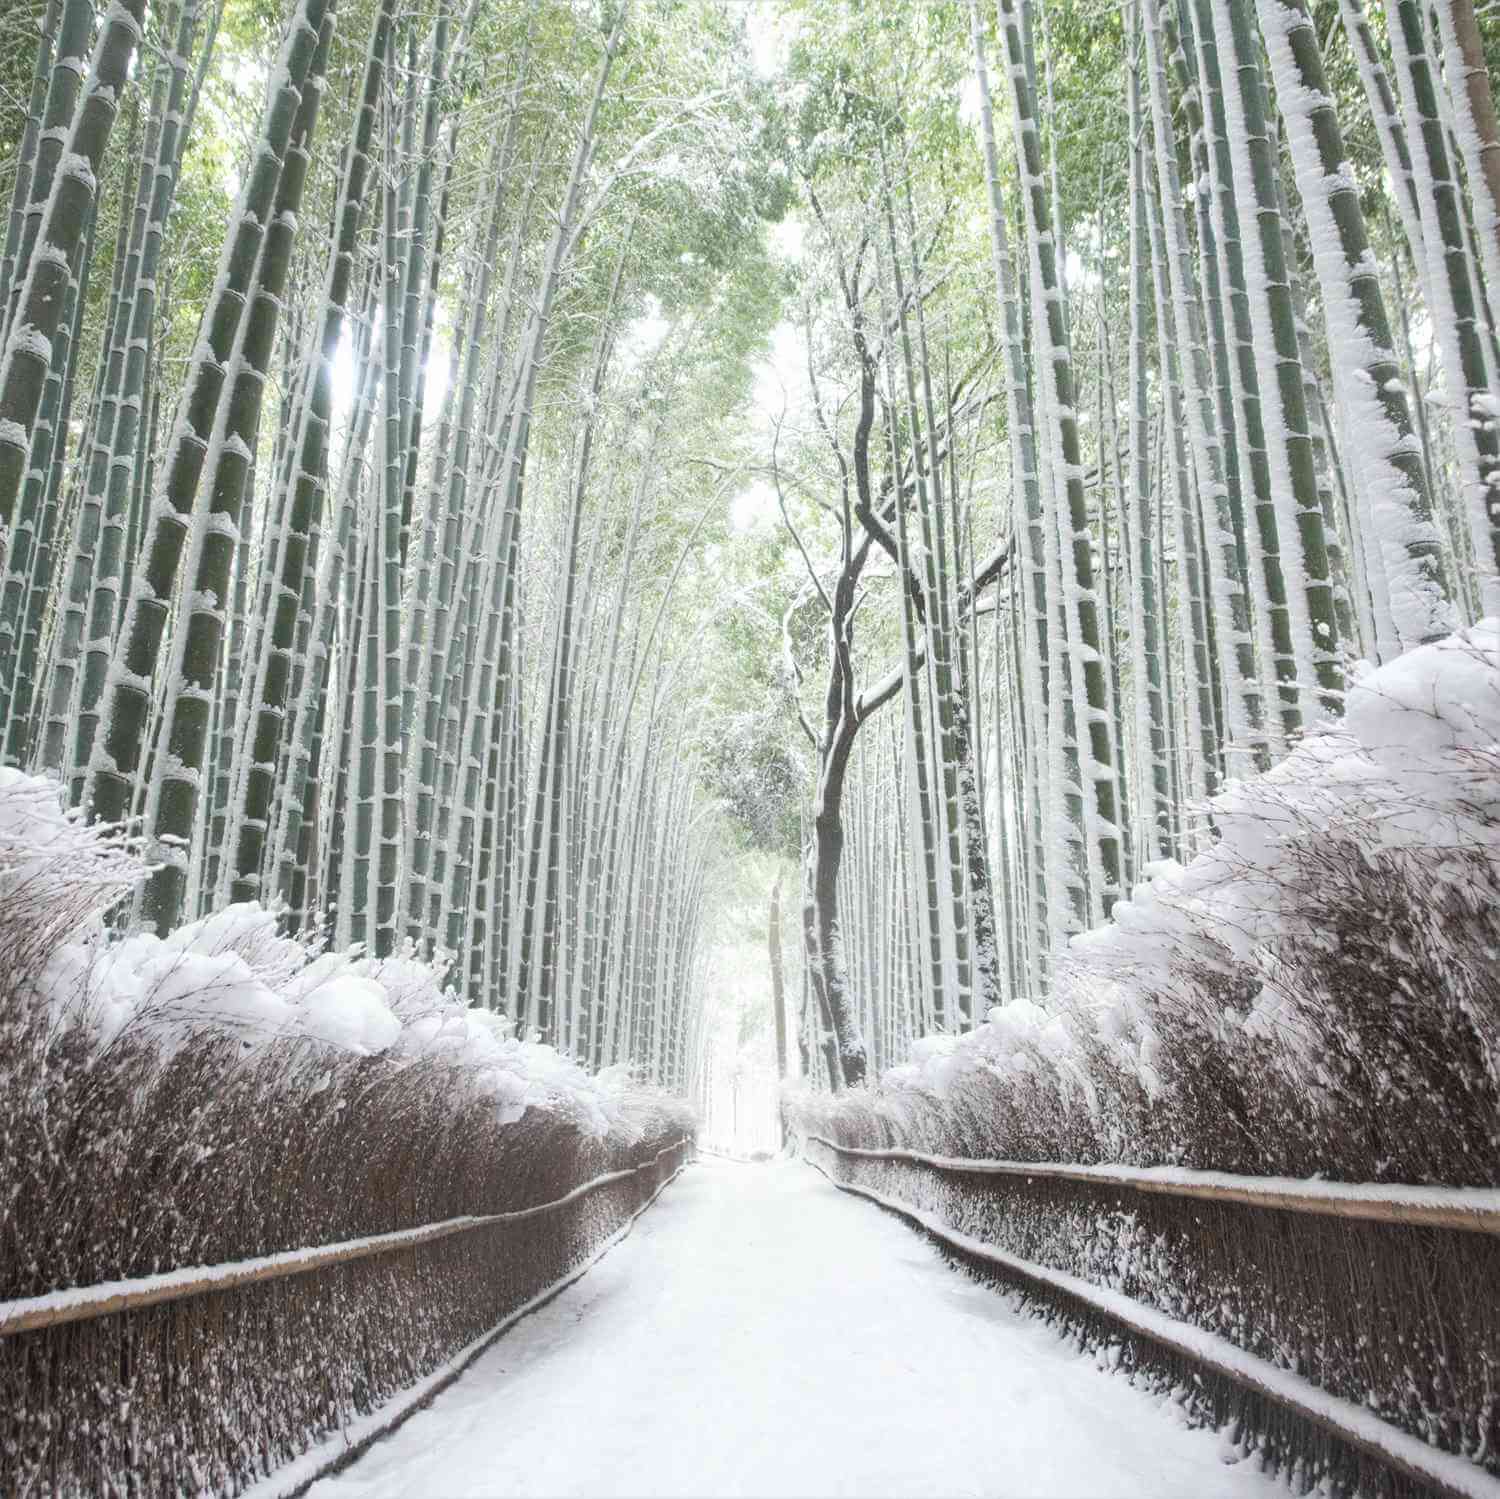 If it snows, let's go to Arashiyama bamboo forest early in the morning = AdobeStock